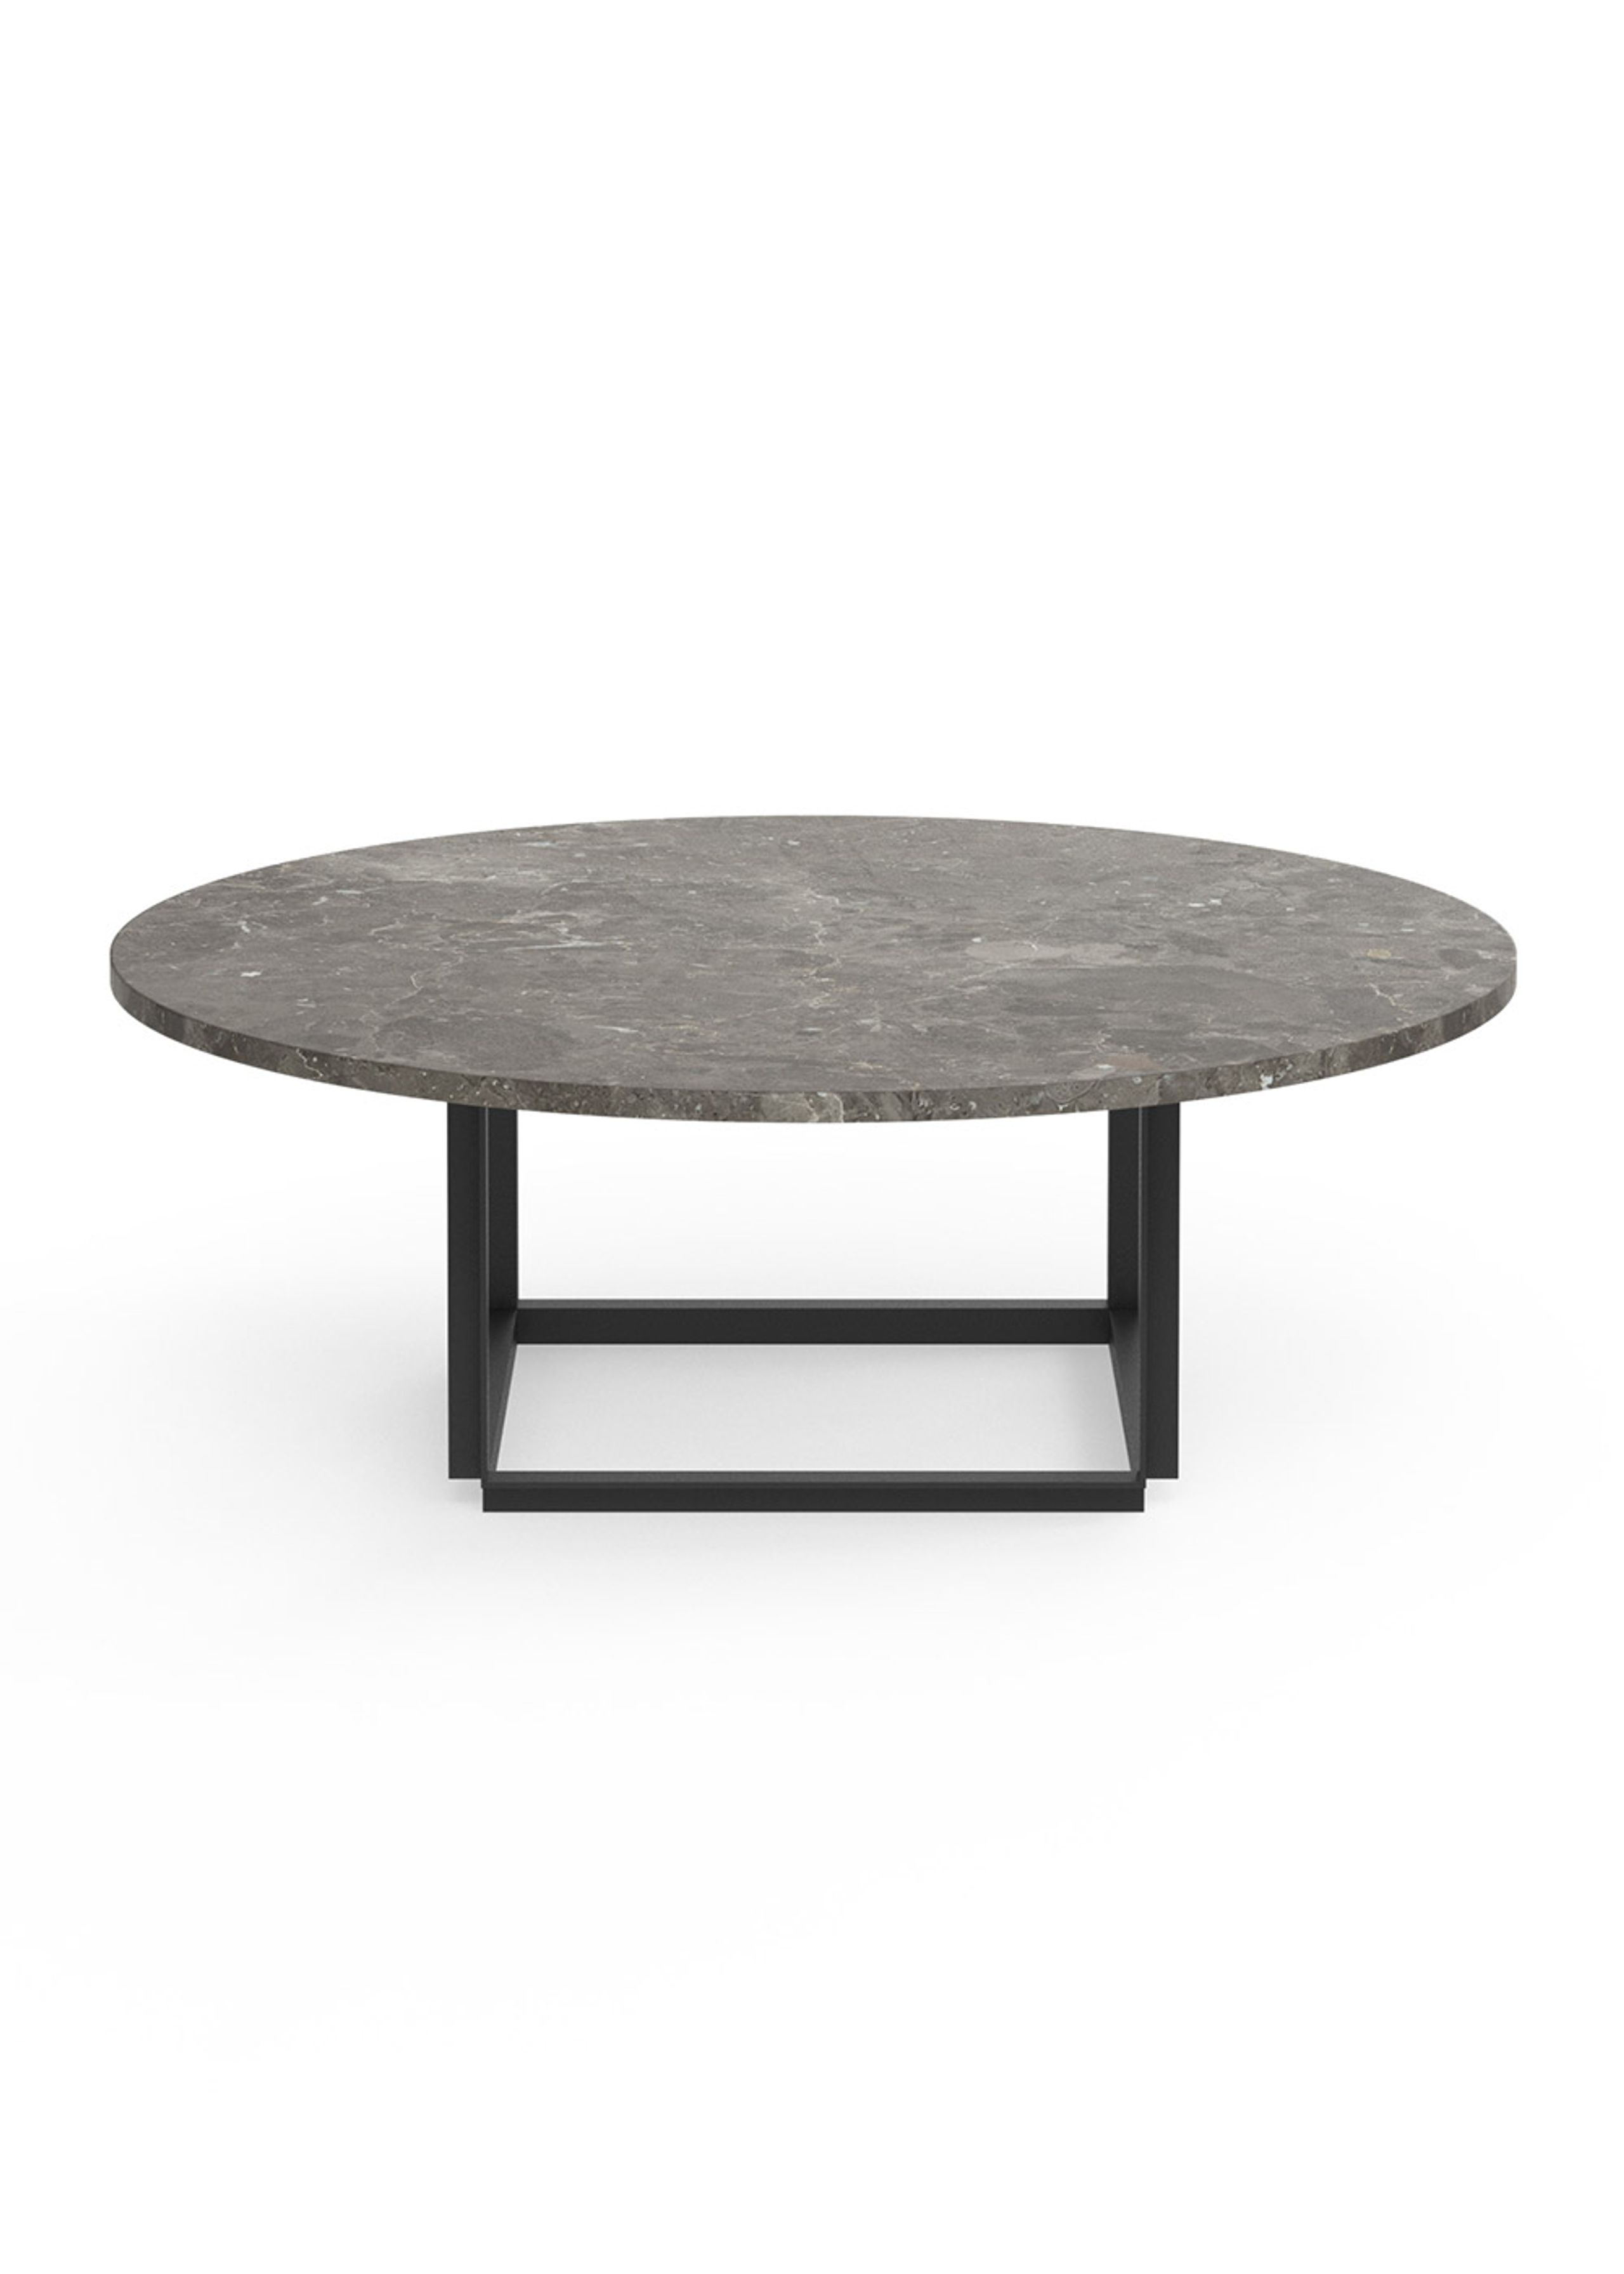 New Works - Table basse - Florence Coffee Table - Gris du Marais Marble w. Black Frame